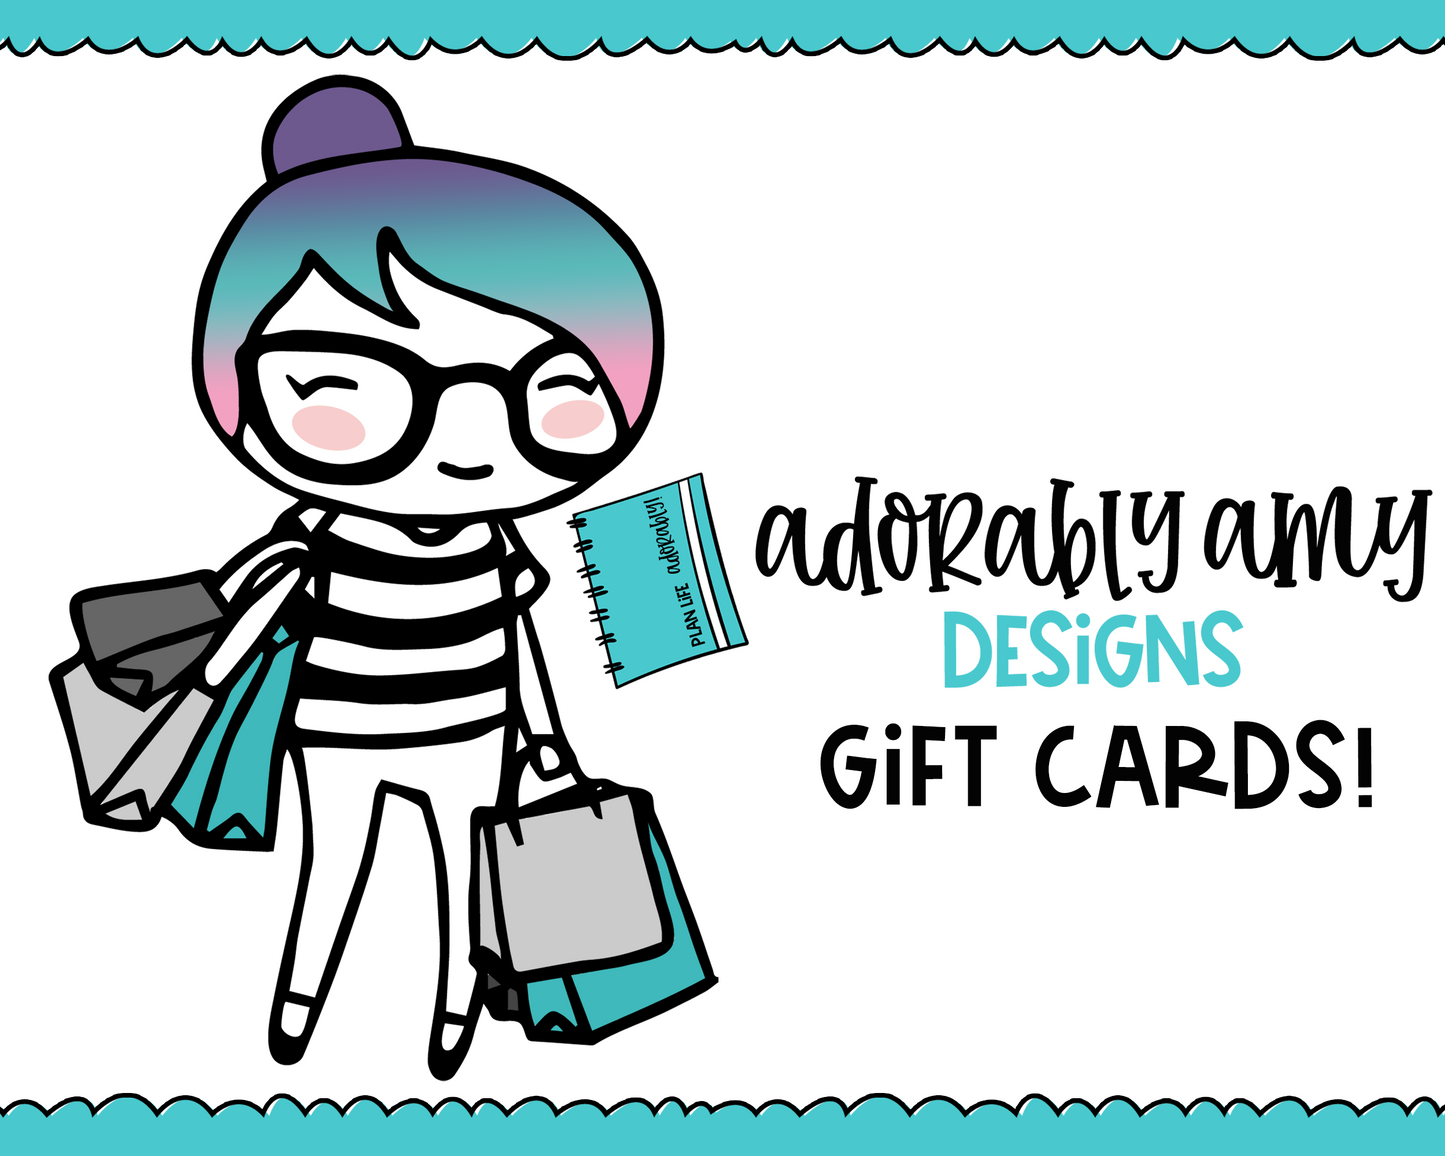 AAD Gift Cards - Adorably Amy Designs